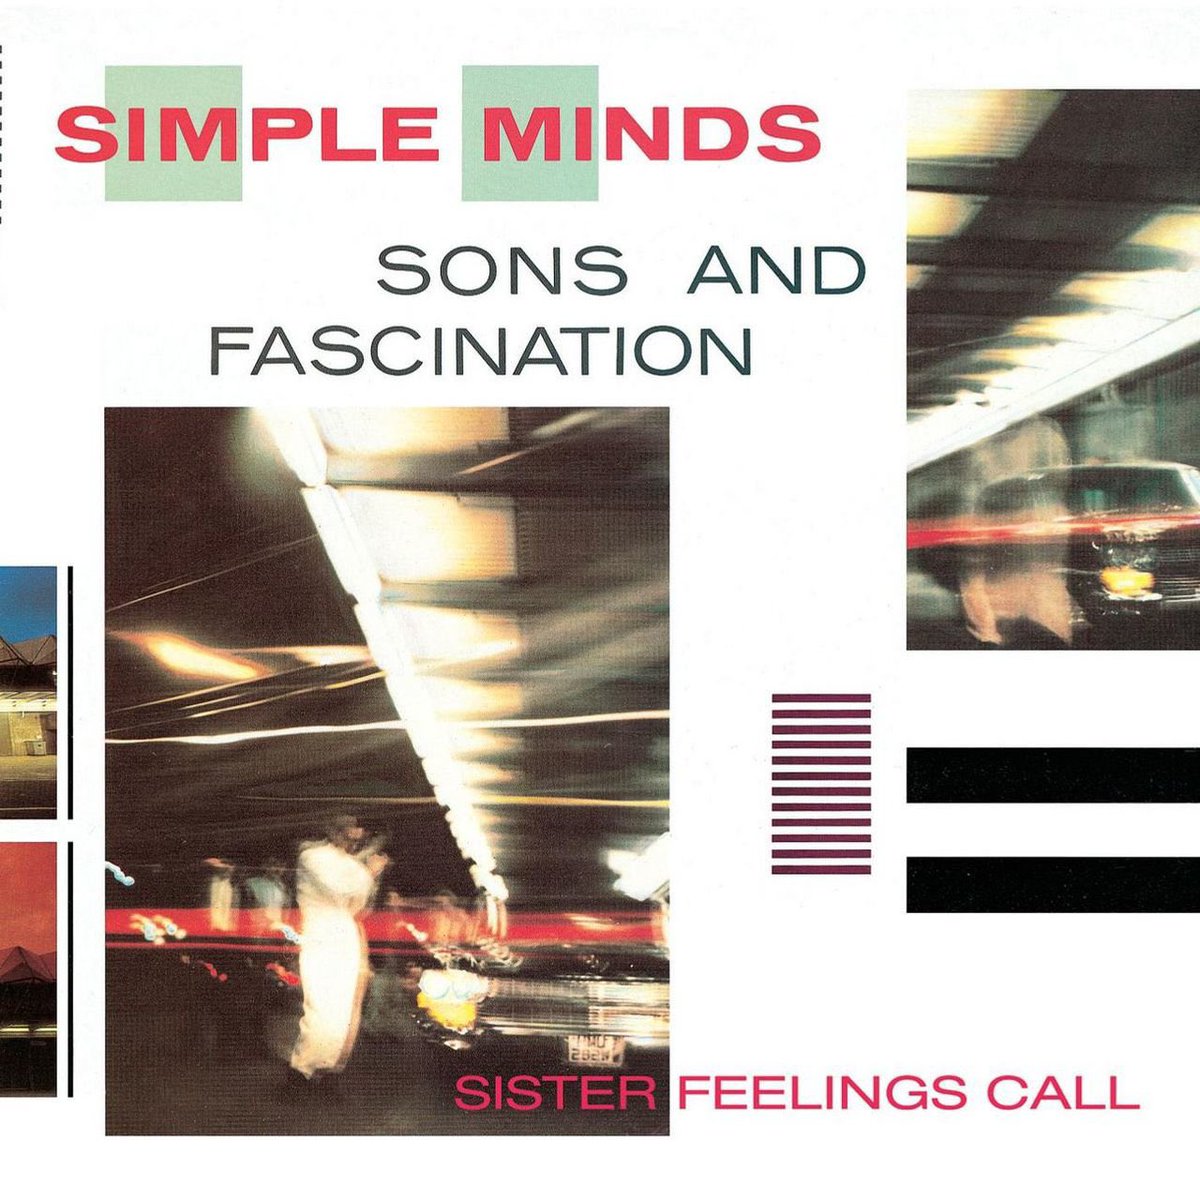 Early Simple Minds albums really are a treasure-trove of art rock, post-punk and electronica. Full of mystery and experimentation. My favourite is 1981’s “Sons and Fascination / Sister Feelings Call”. An often overlooked gem!
#simpleminds #sonsandfascination